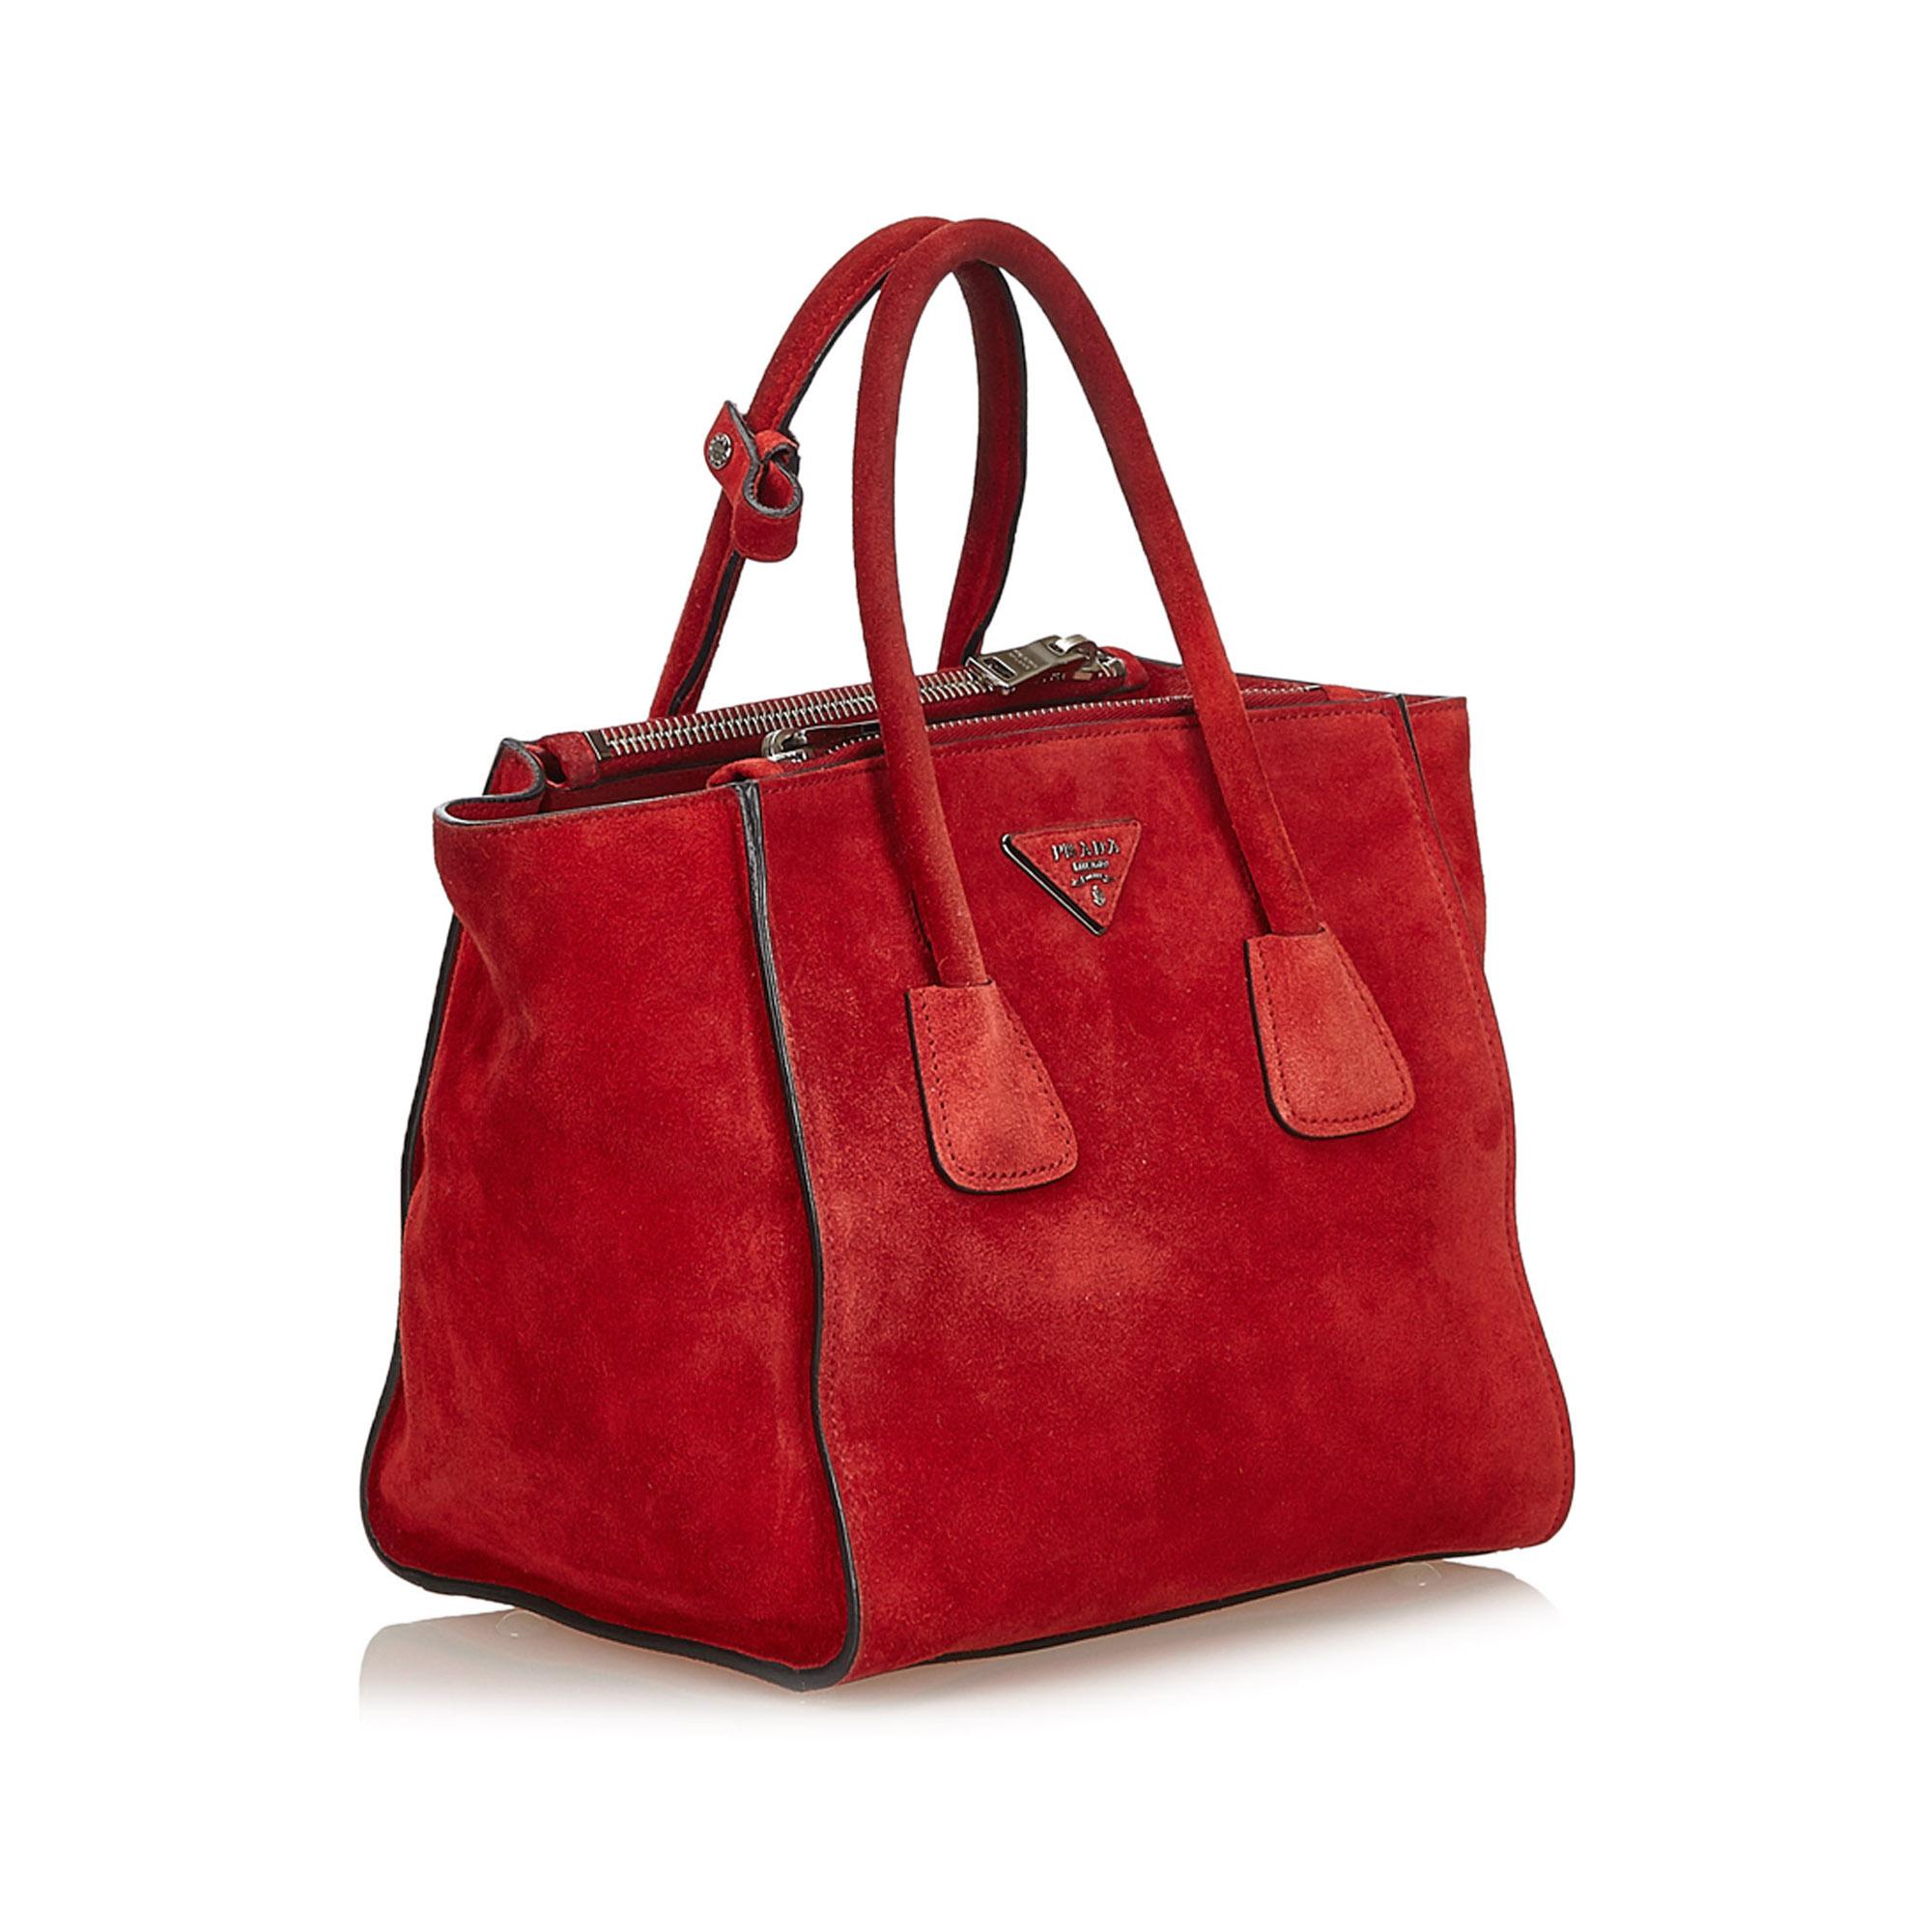 The Twin Pocket Bag features a suede leather body, rolled leather handles, zip compartments, button clasp closure, and interior zip pocket. It carries as B+ condition rating.

Inclusions: 
Dust Bag
Authenticity Card

Dimensions:
Length: 23.00